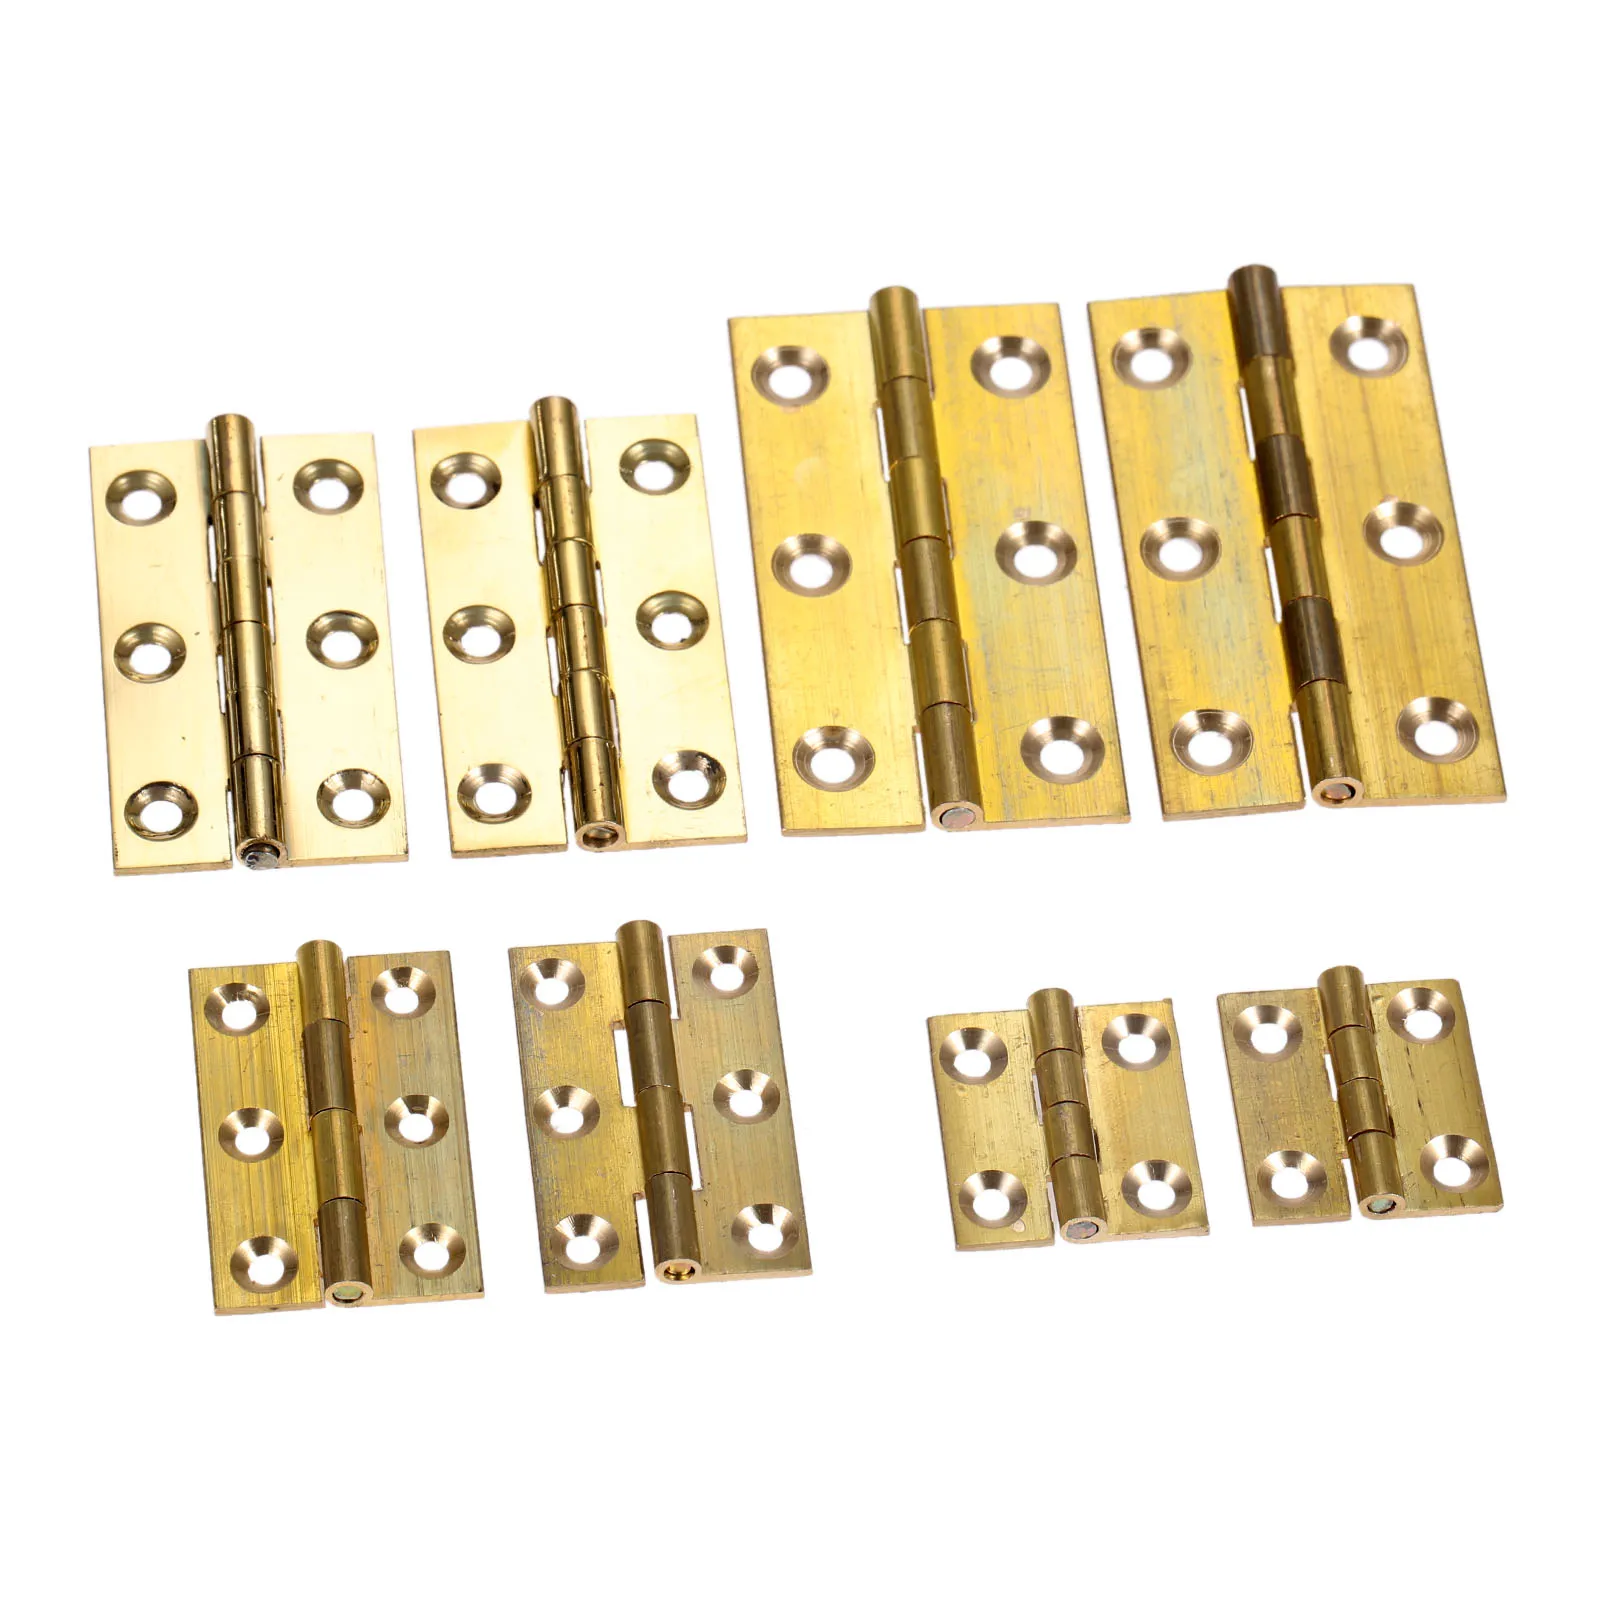 DRELD 2pcs Brass Decorative Cabinet Hinge 1/1.5/2/2.5 inch Wooden Jewelry Box Hinge Furniture Fittings with Screws